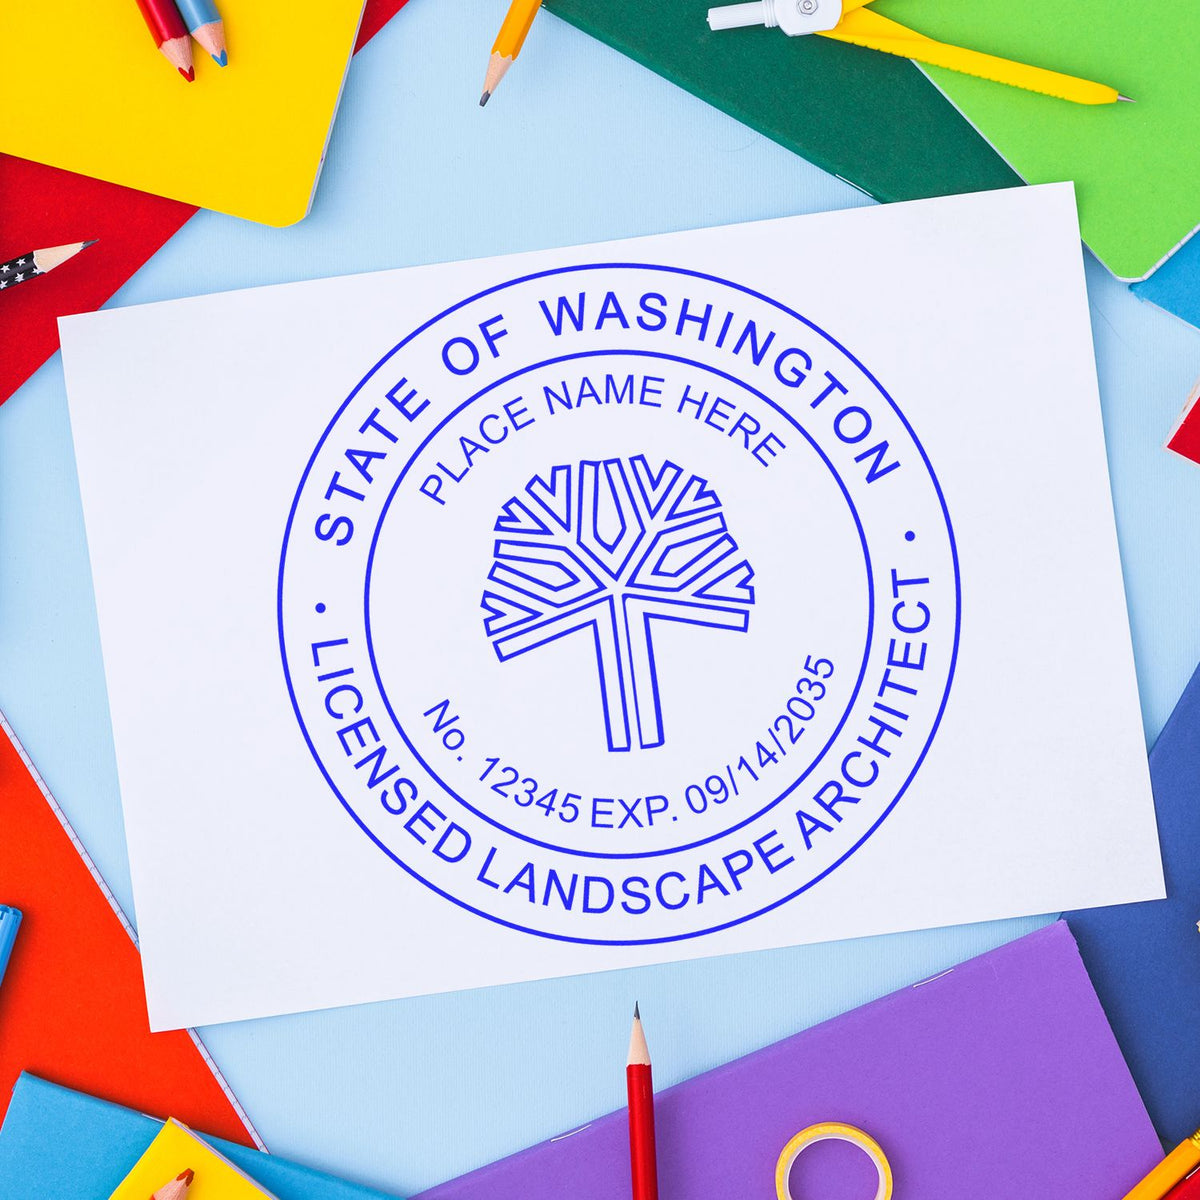 The Premium MaxLight Pre-Inked Washington Landscape Architectural Stamp stamp impression comes to life with a crisp, detailed photo on paper - showcasing true professional quality.